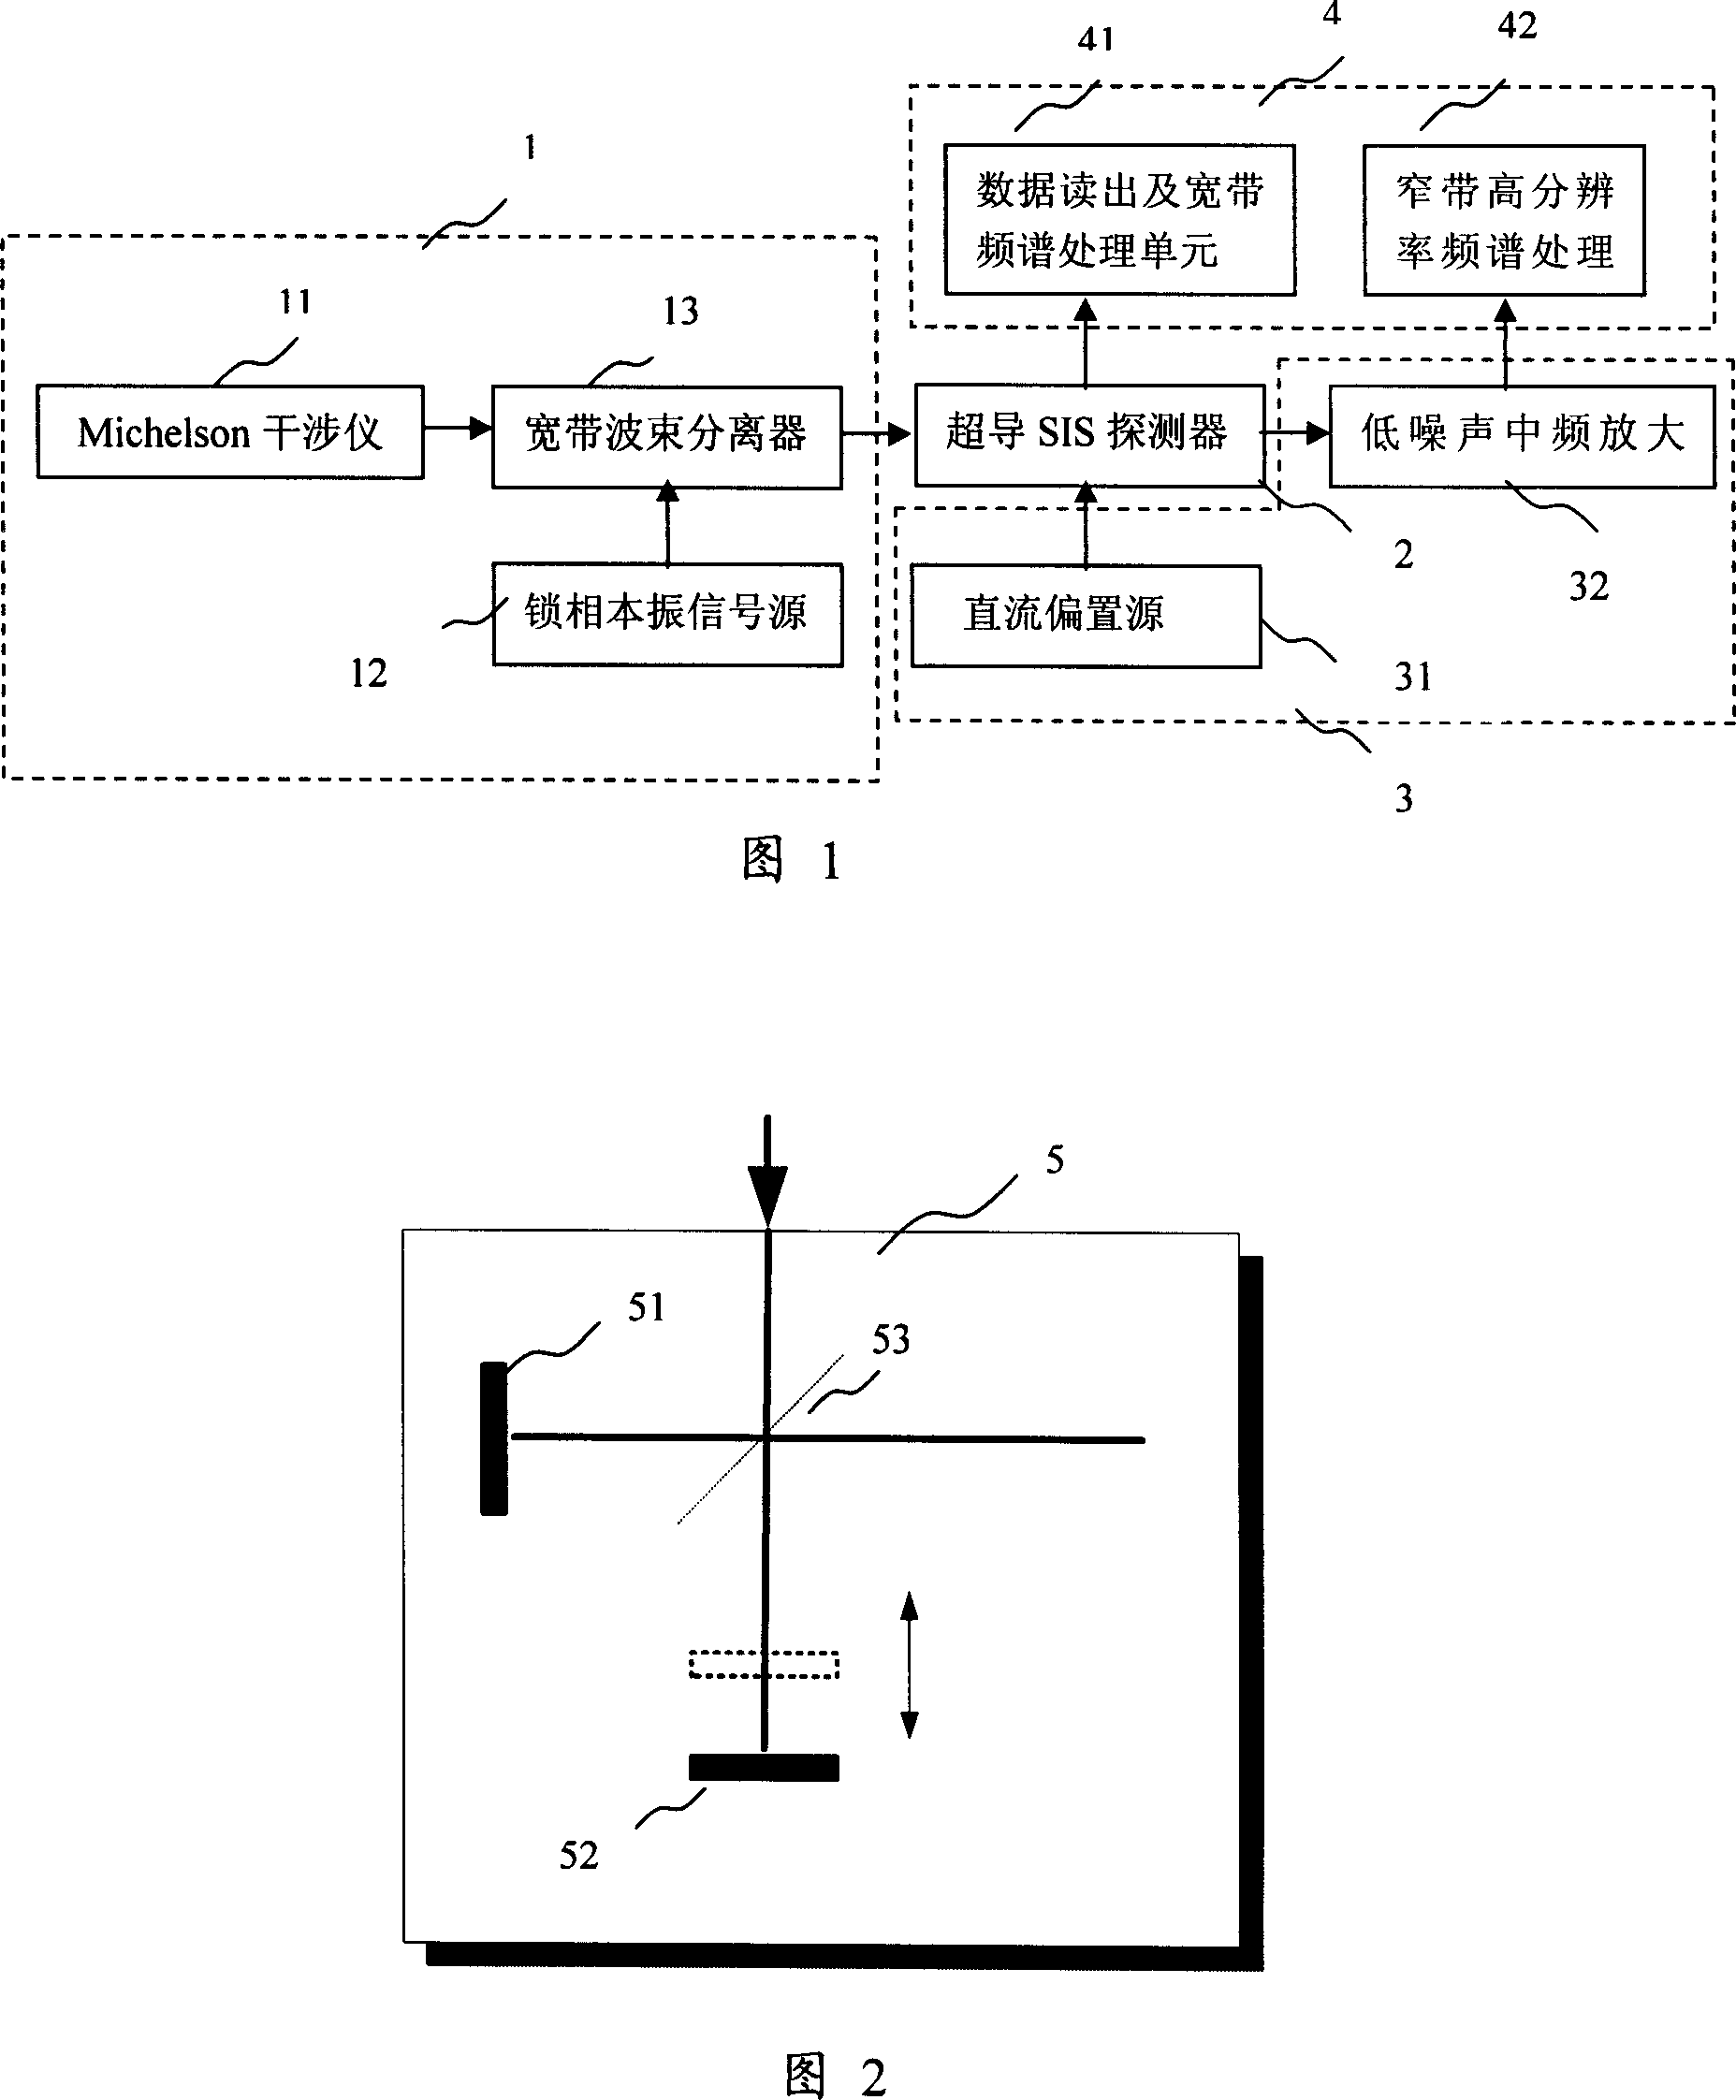 Broad band and high resolution ratio millimeter wave and sub millimeter wave signal detecting system